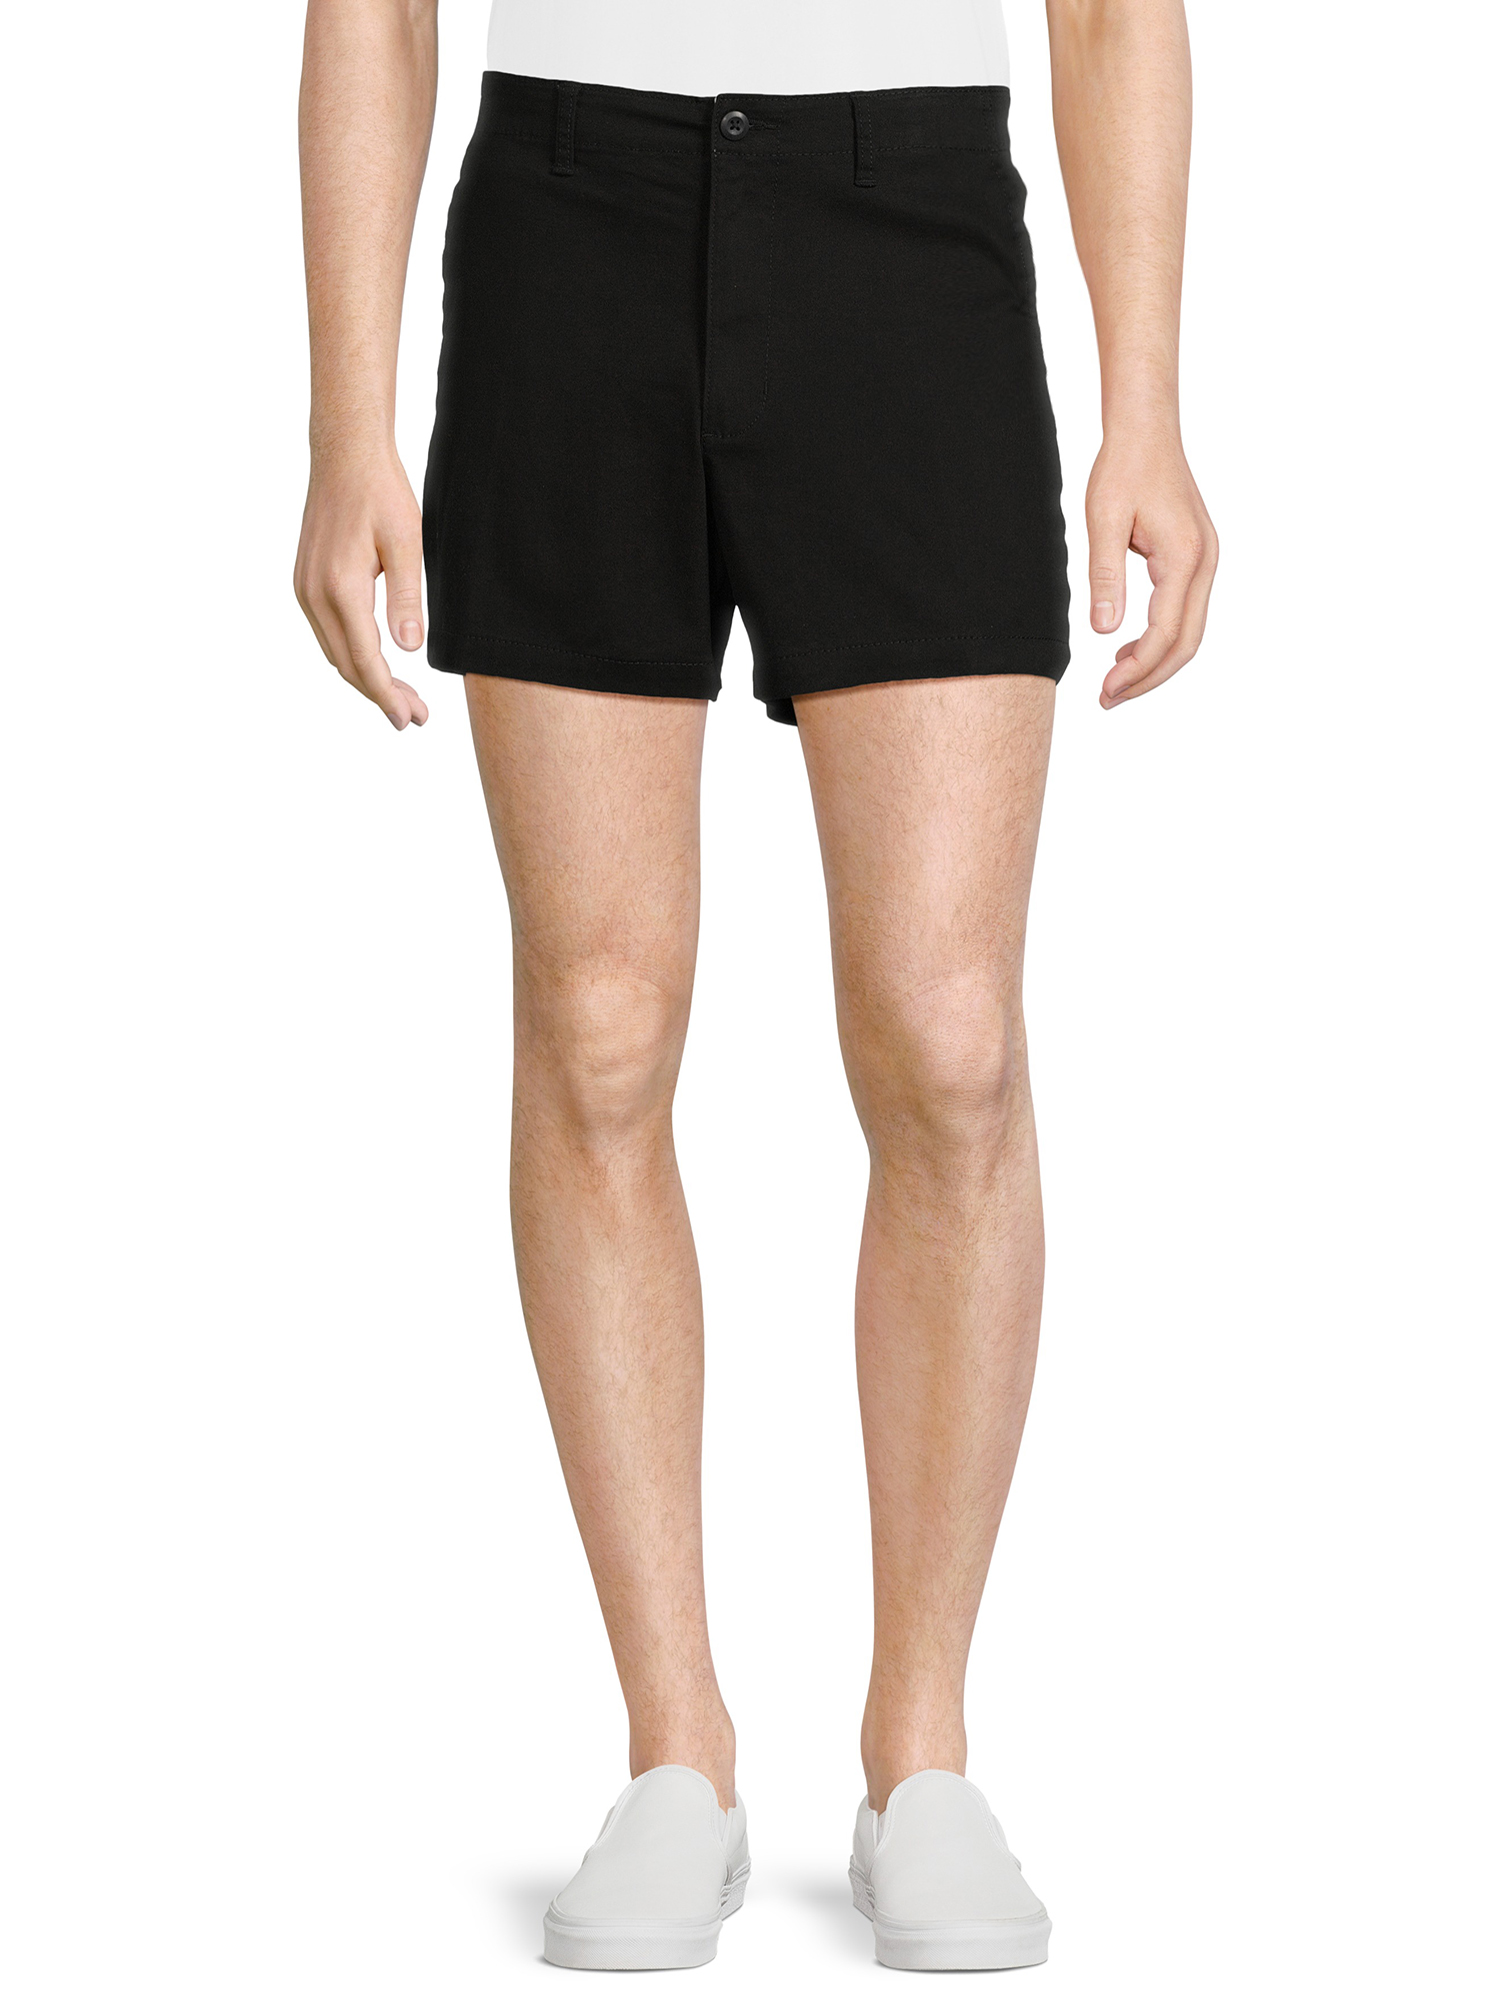 George Men's and Big Men's Flat Front Shorts, 5" Inseam, Sizes 30-46